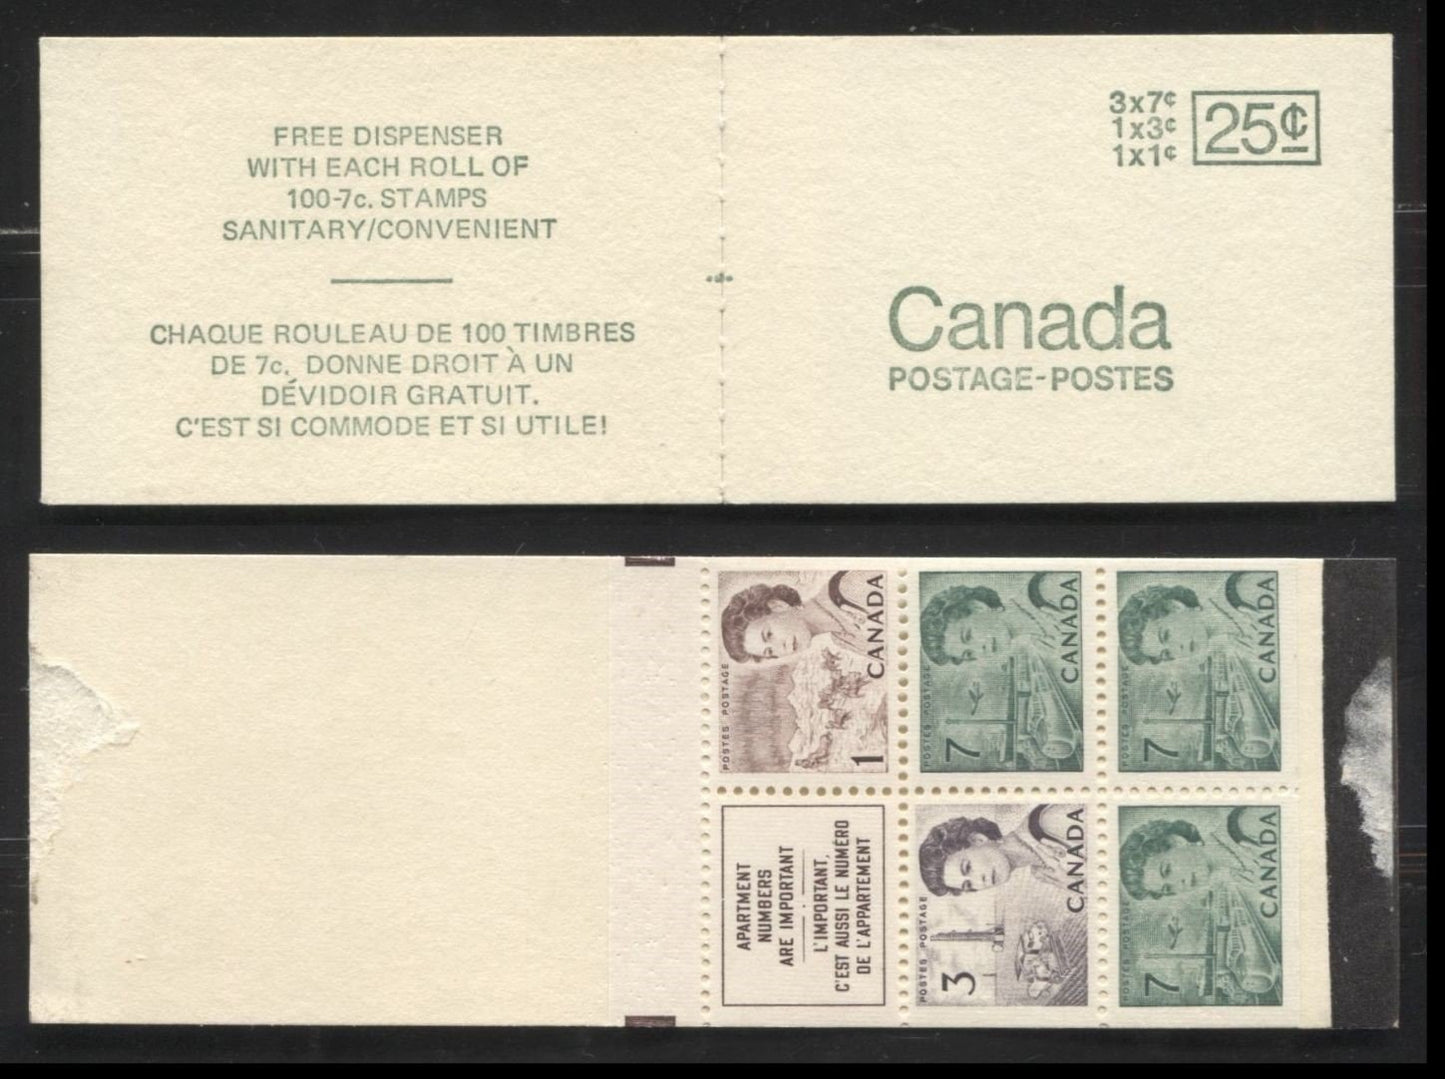 Lot #37 Canada #BK66a 1c Purple Brown, 3c Slate Purple, And 7c Slate Green, 1967-1973 Centennial Issue, A Specialized Lot of Two 25c Booklets Containing One Pane of 5 Plus Label, Type 1 Free Dispenser Cover, Black Seal Strip, Different LF-fl Papers